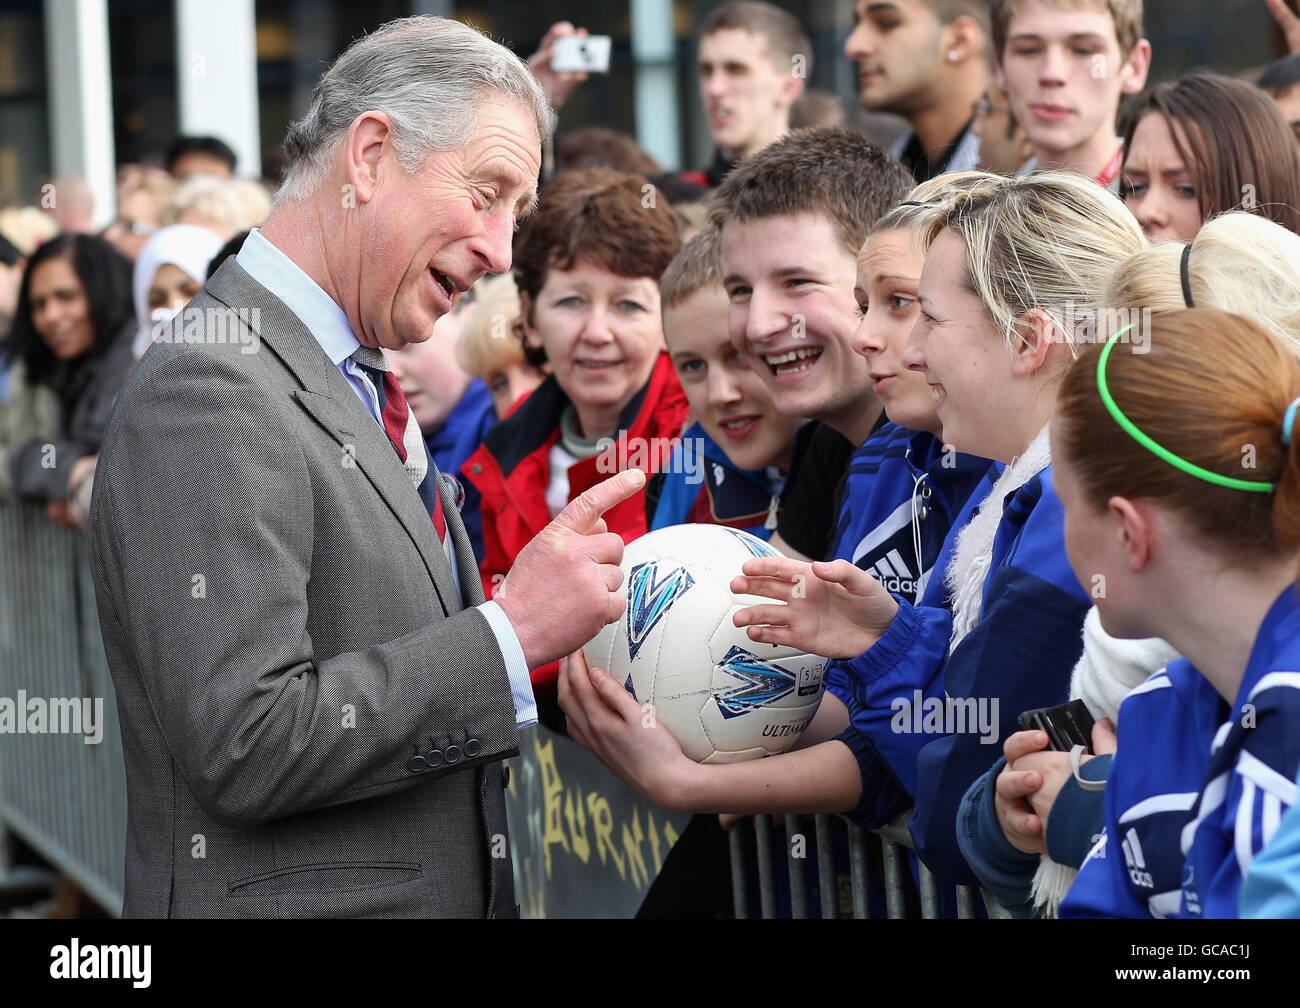 The Prince of Wales meets members of the public and students as he leaves Burnley College / University of Central Lancashire Campus in Burnley, Lancashire. Stock Photo